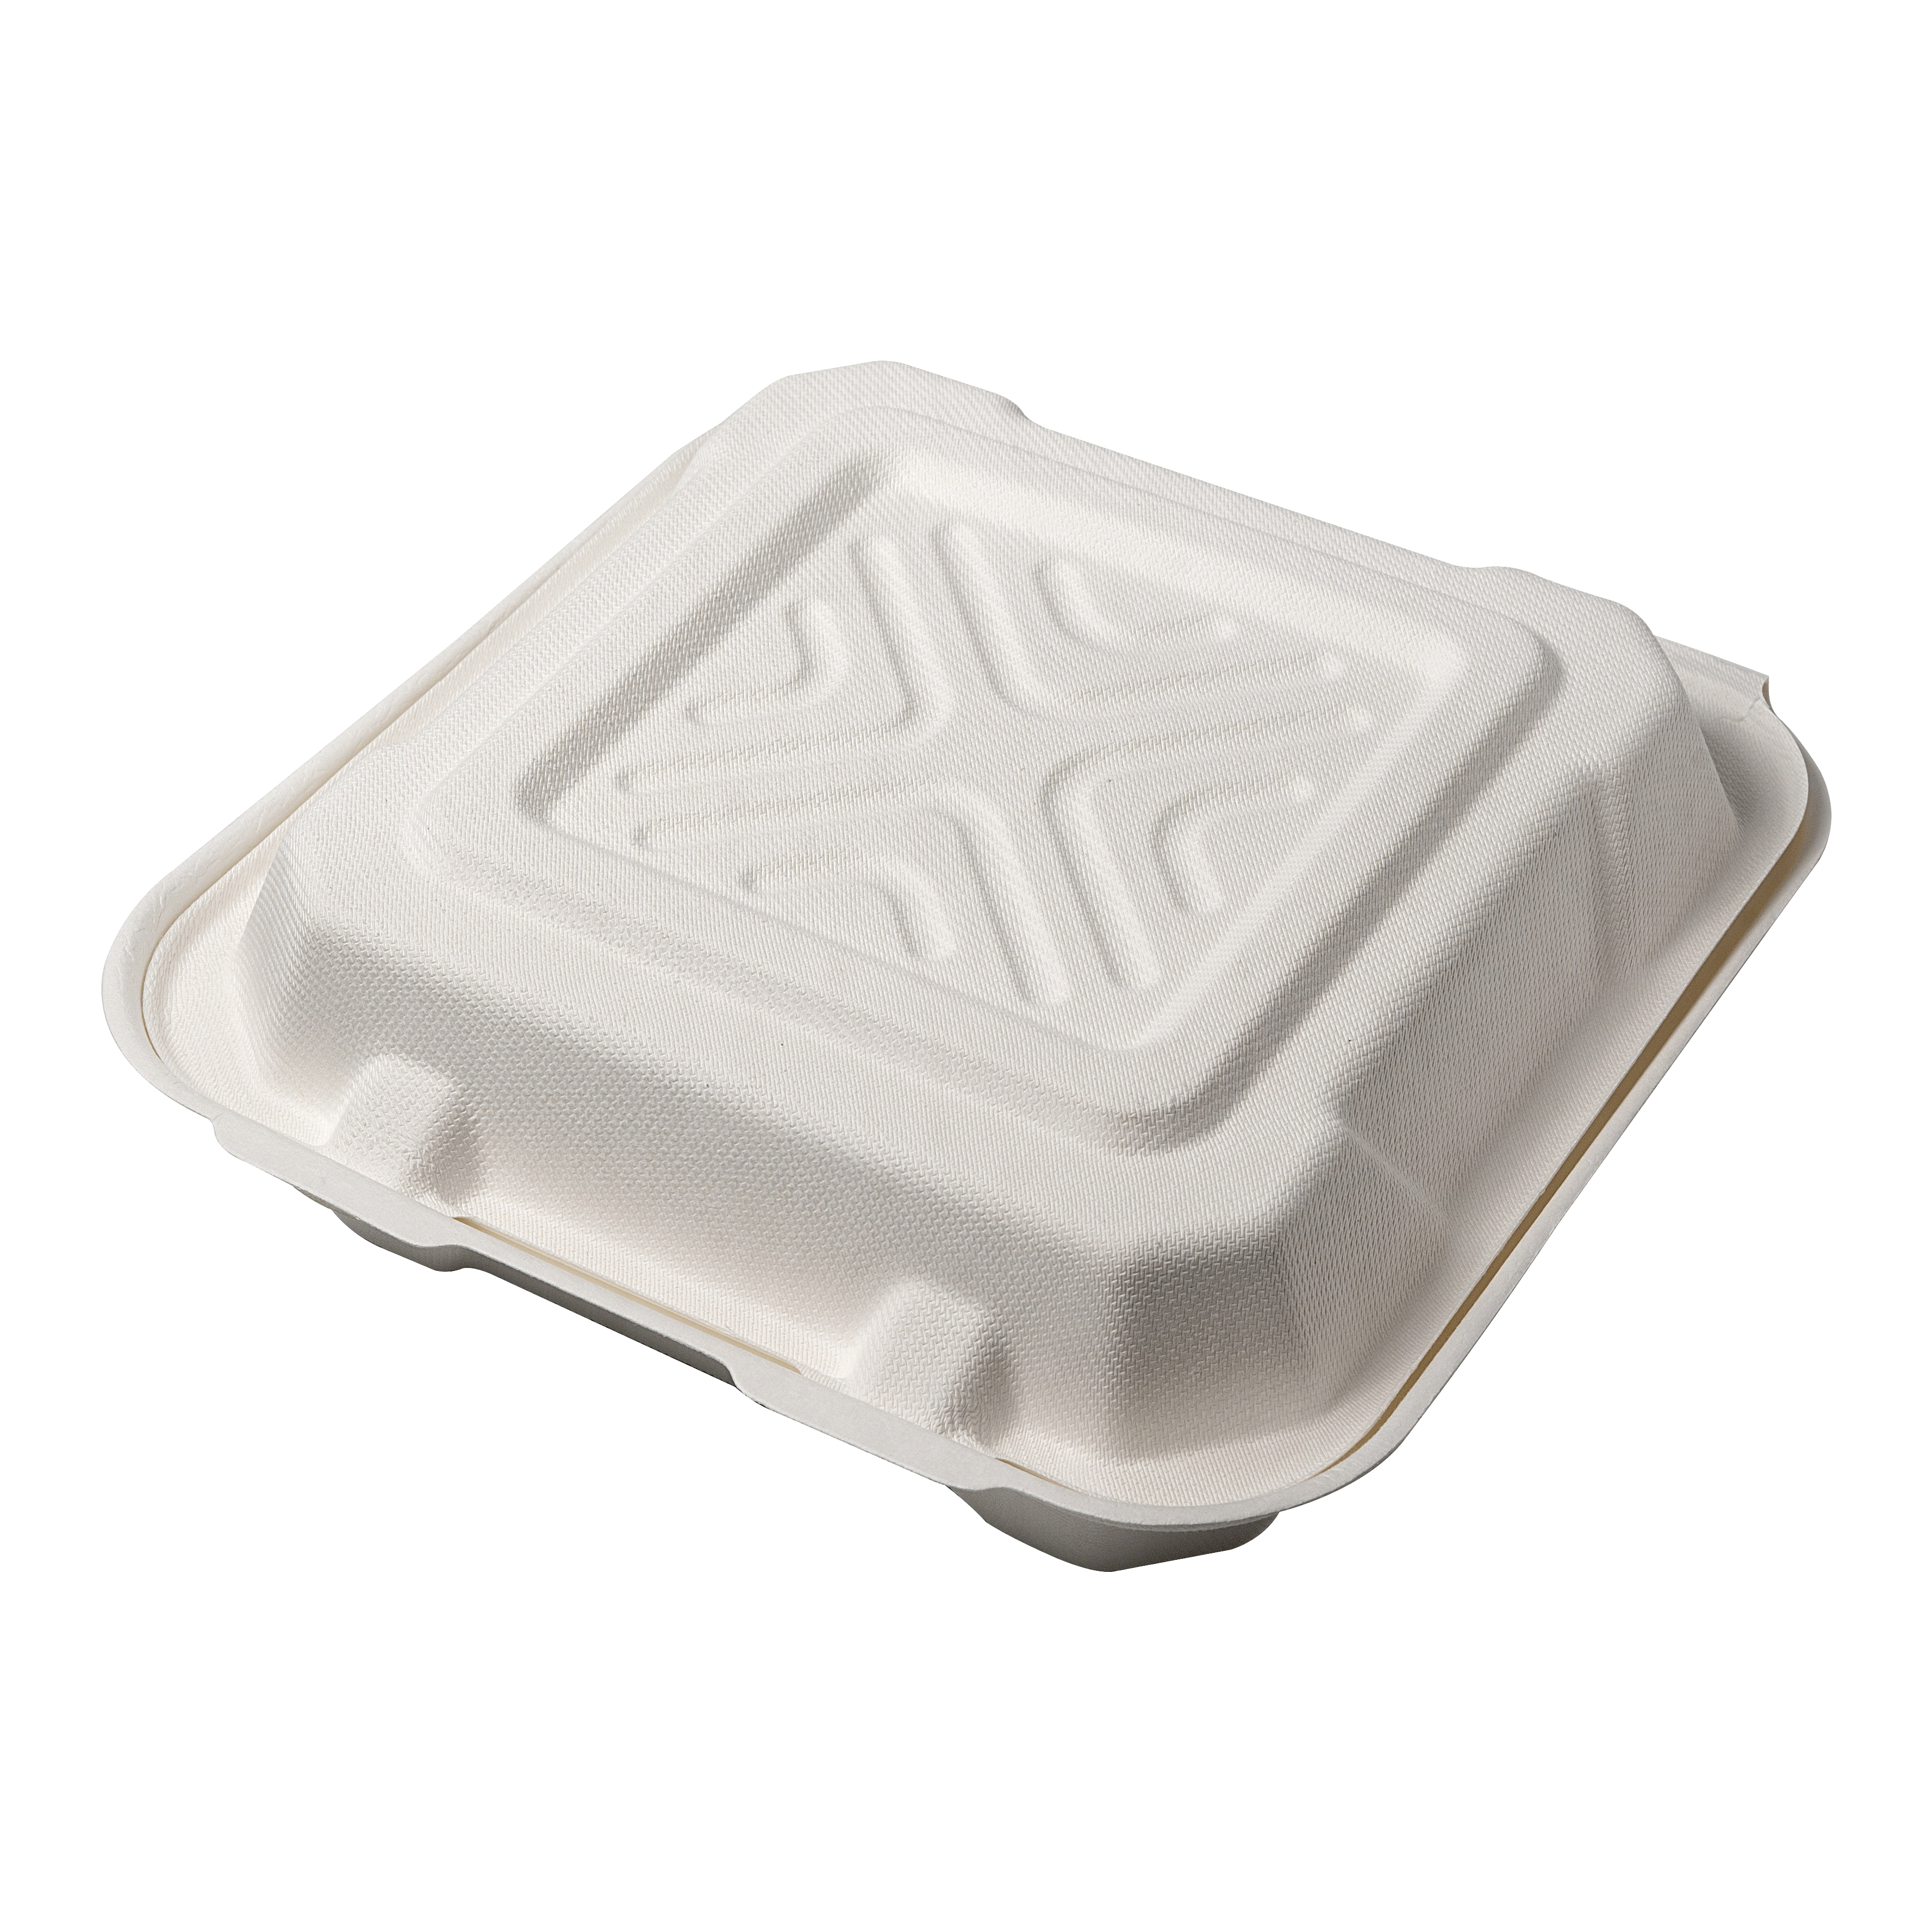 BAGASSE MEAL BOX 1 COMPARTMENT BMB1 HP4 50